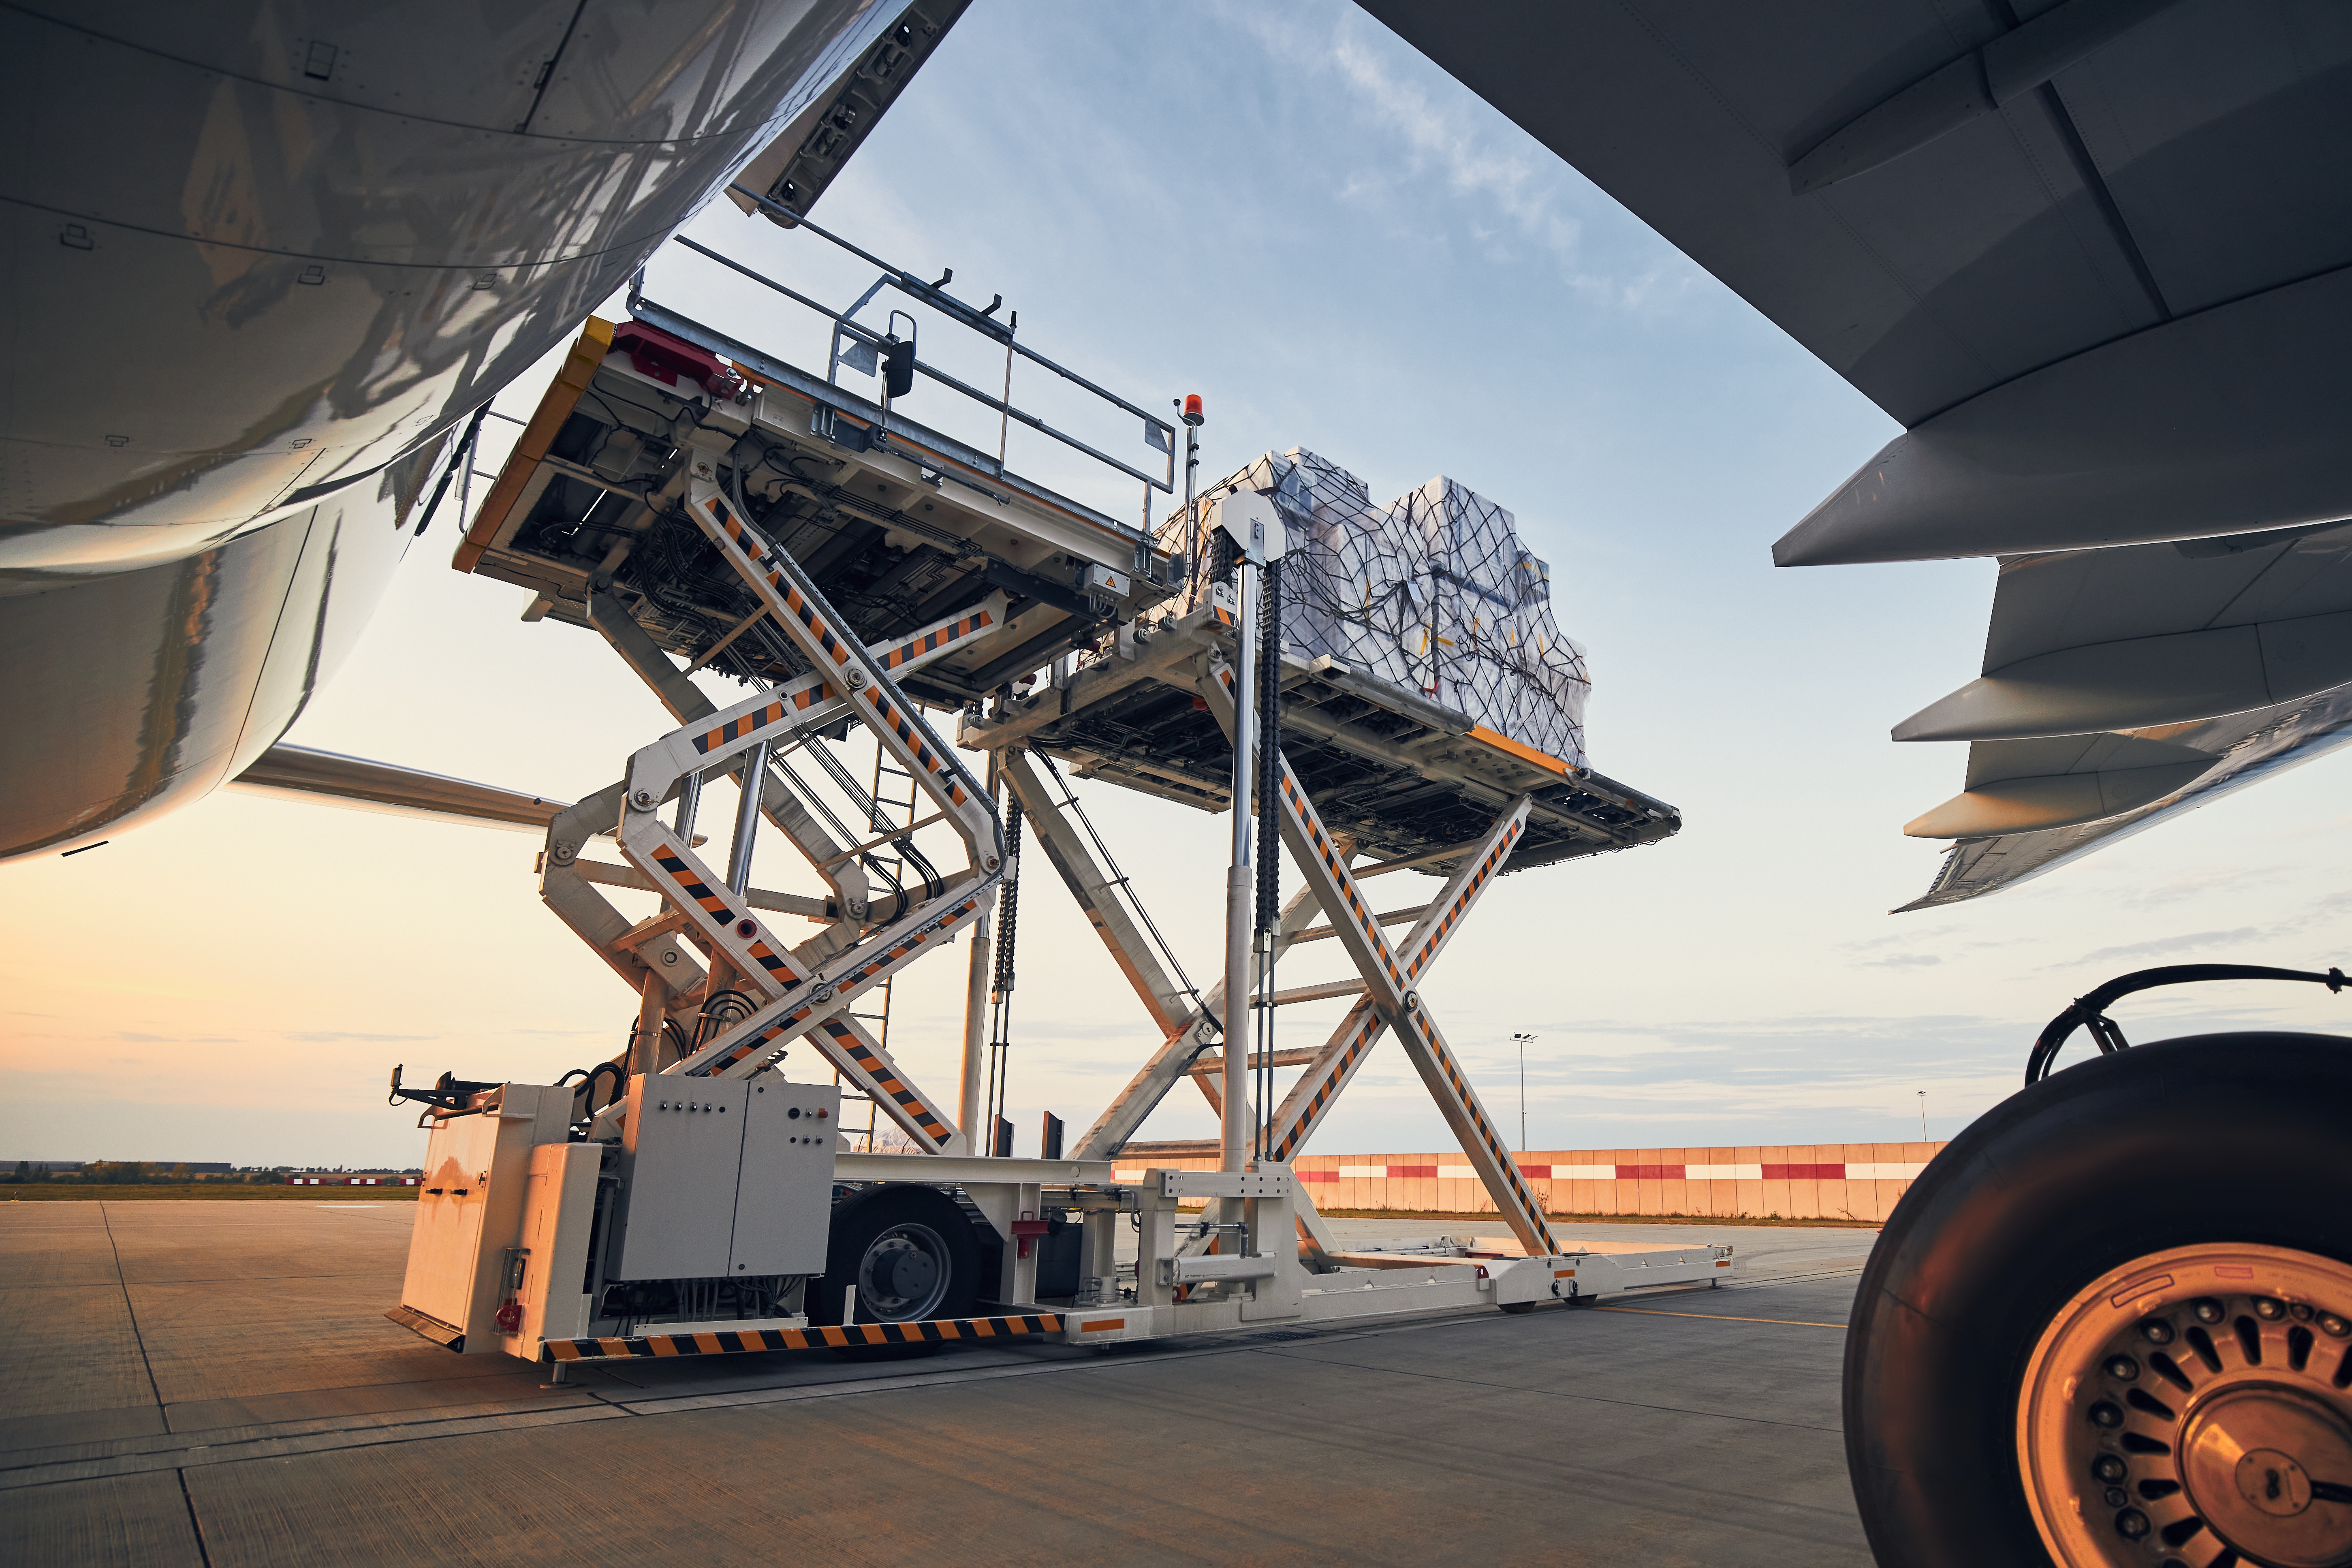 loading-of-cargo-containers-to-airplane-at-sunset-2023-11-27-05-27-27-utc